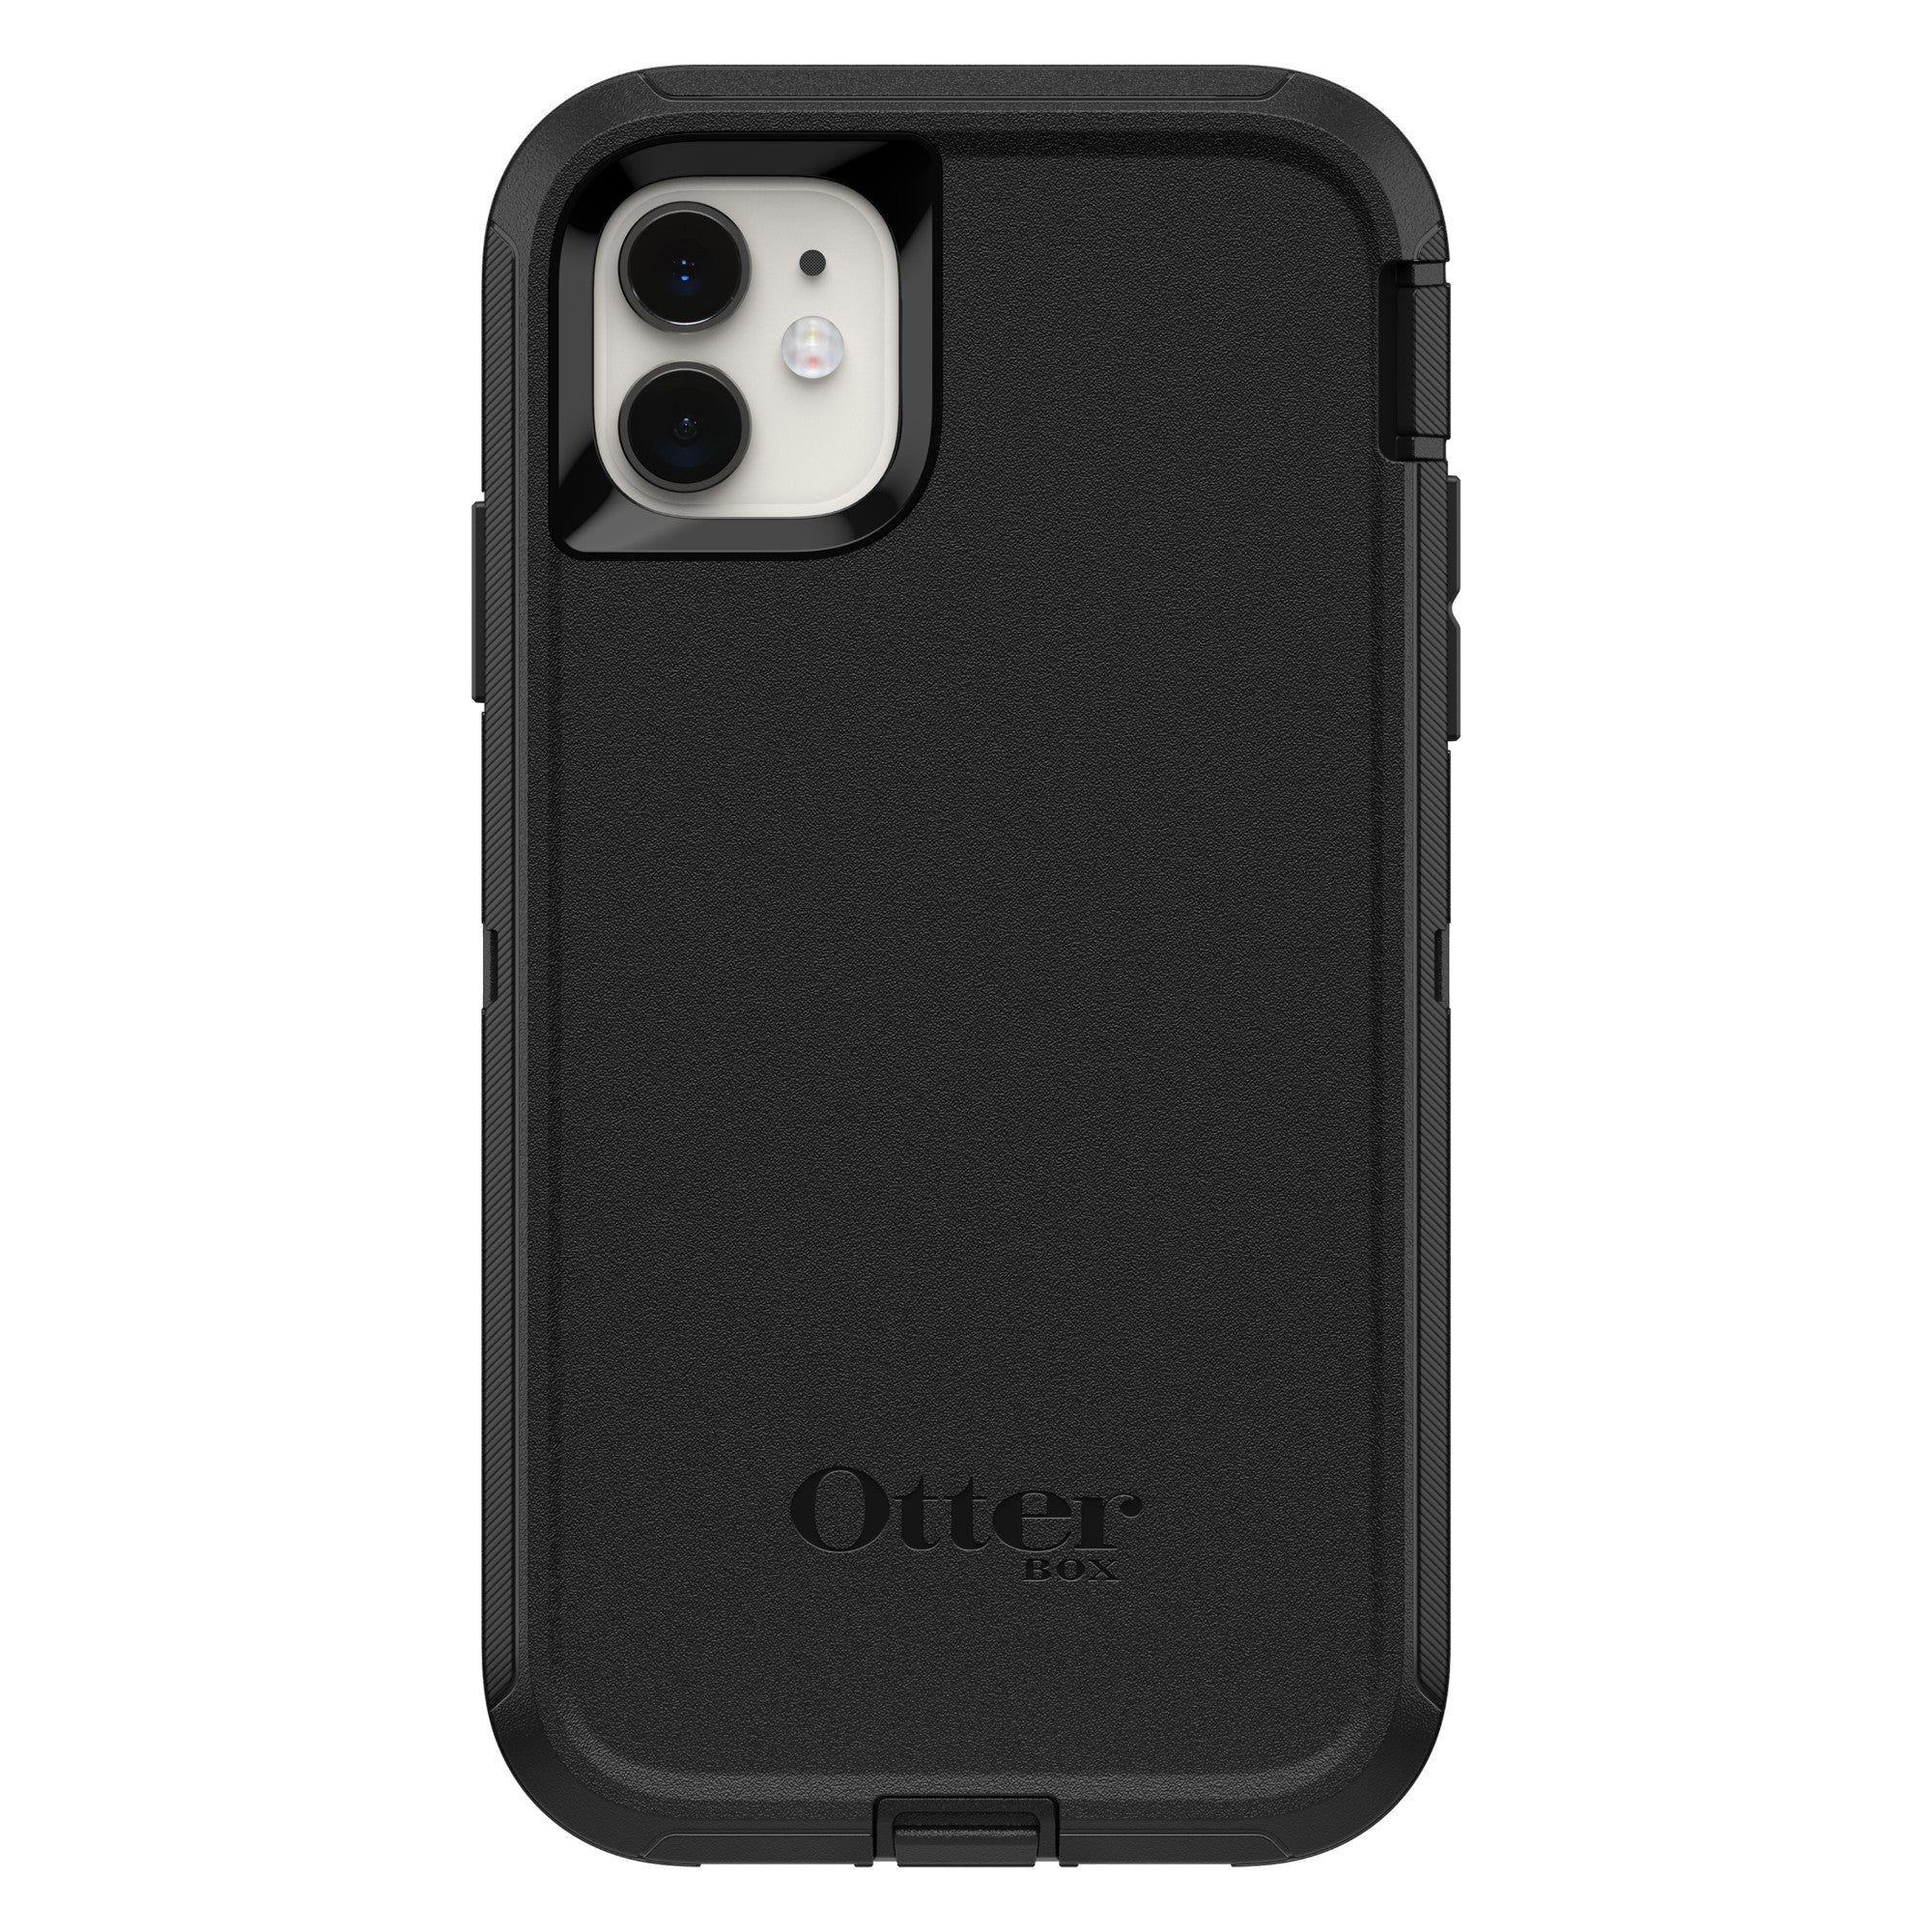 OtterBox Defender Series for Apple iPhone 11, black